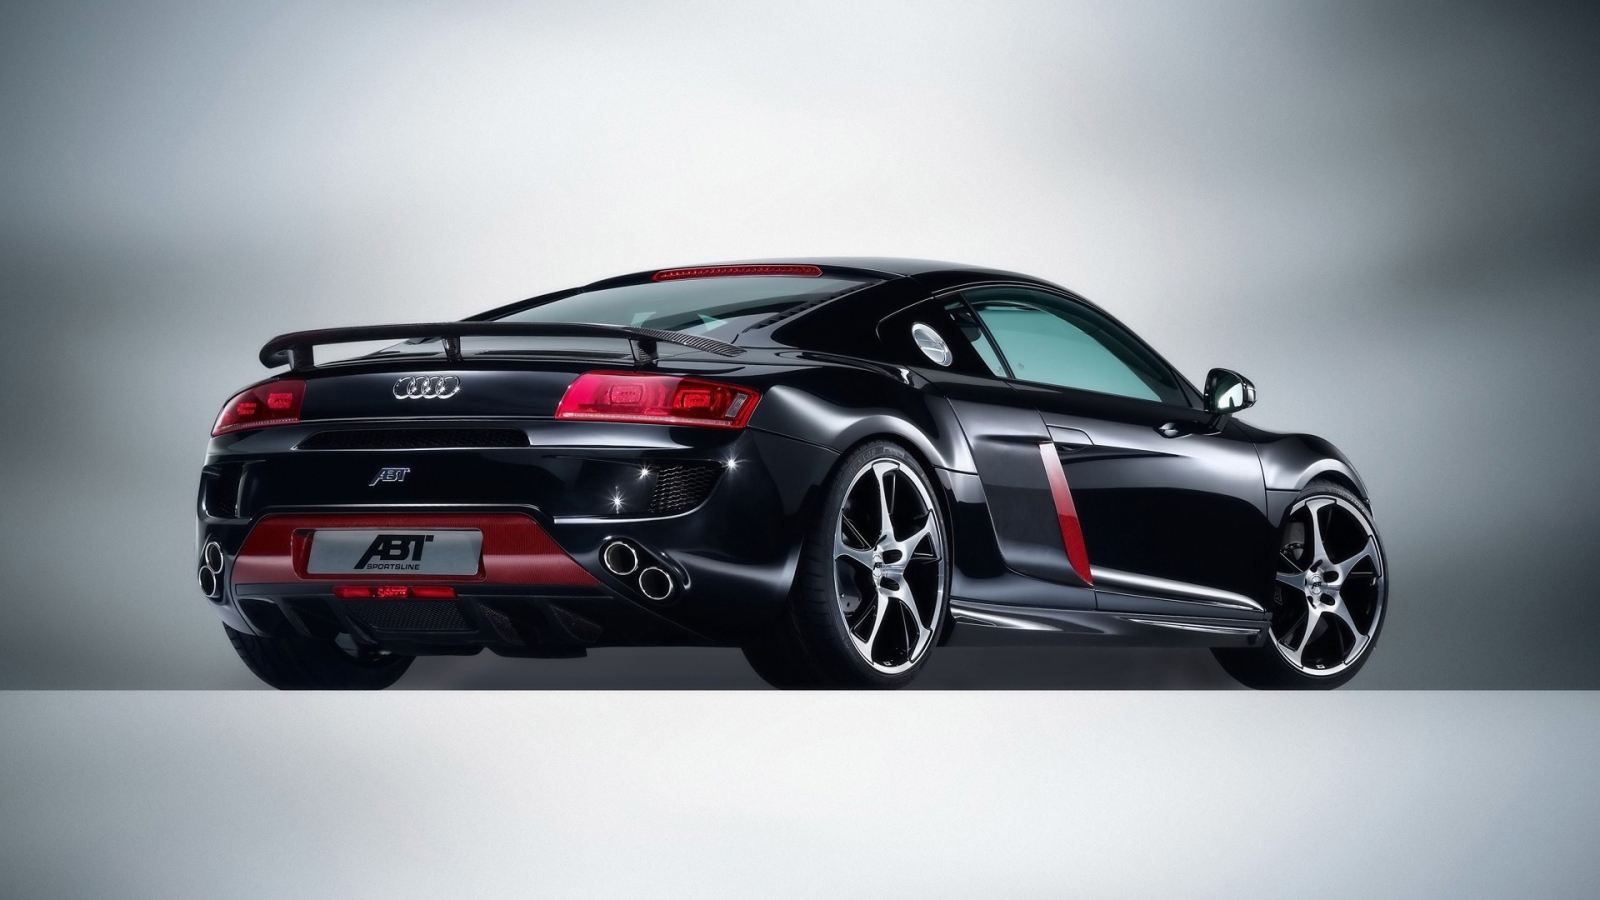 2008 Abt Audi R8 - Rear Angle for 1600 x 900 HDTV resolution